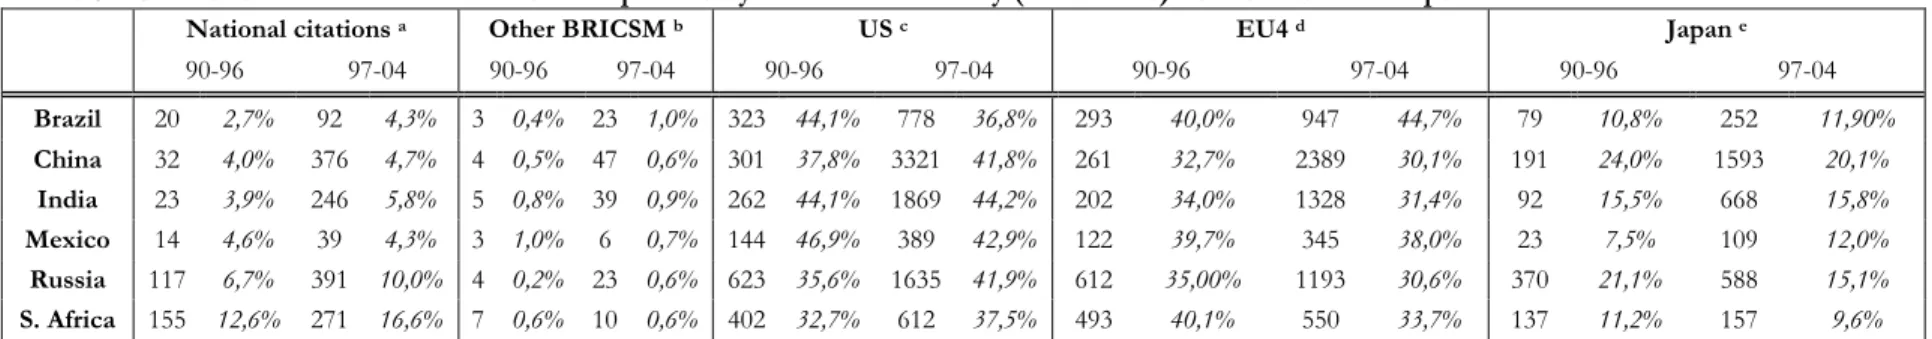 Table 3. Number of backward citations to EPO patents by destination country (and shares) before and after Trips 